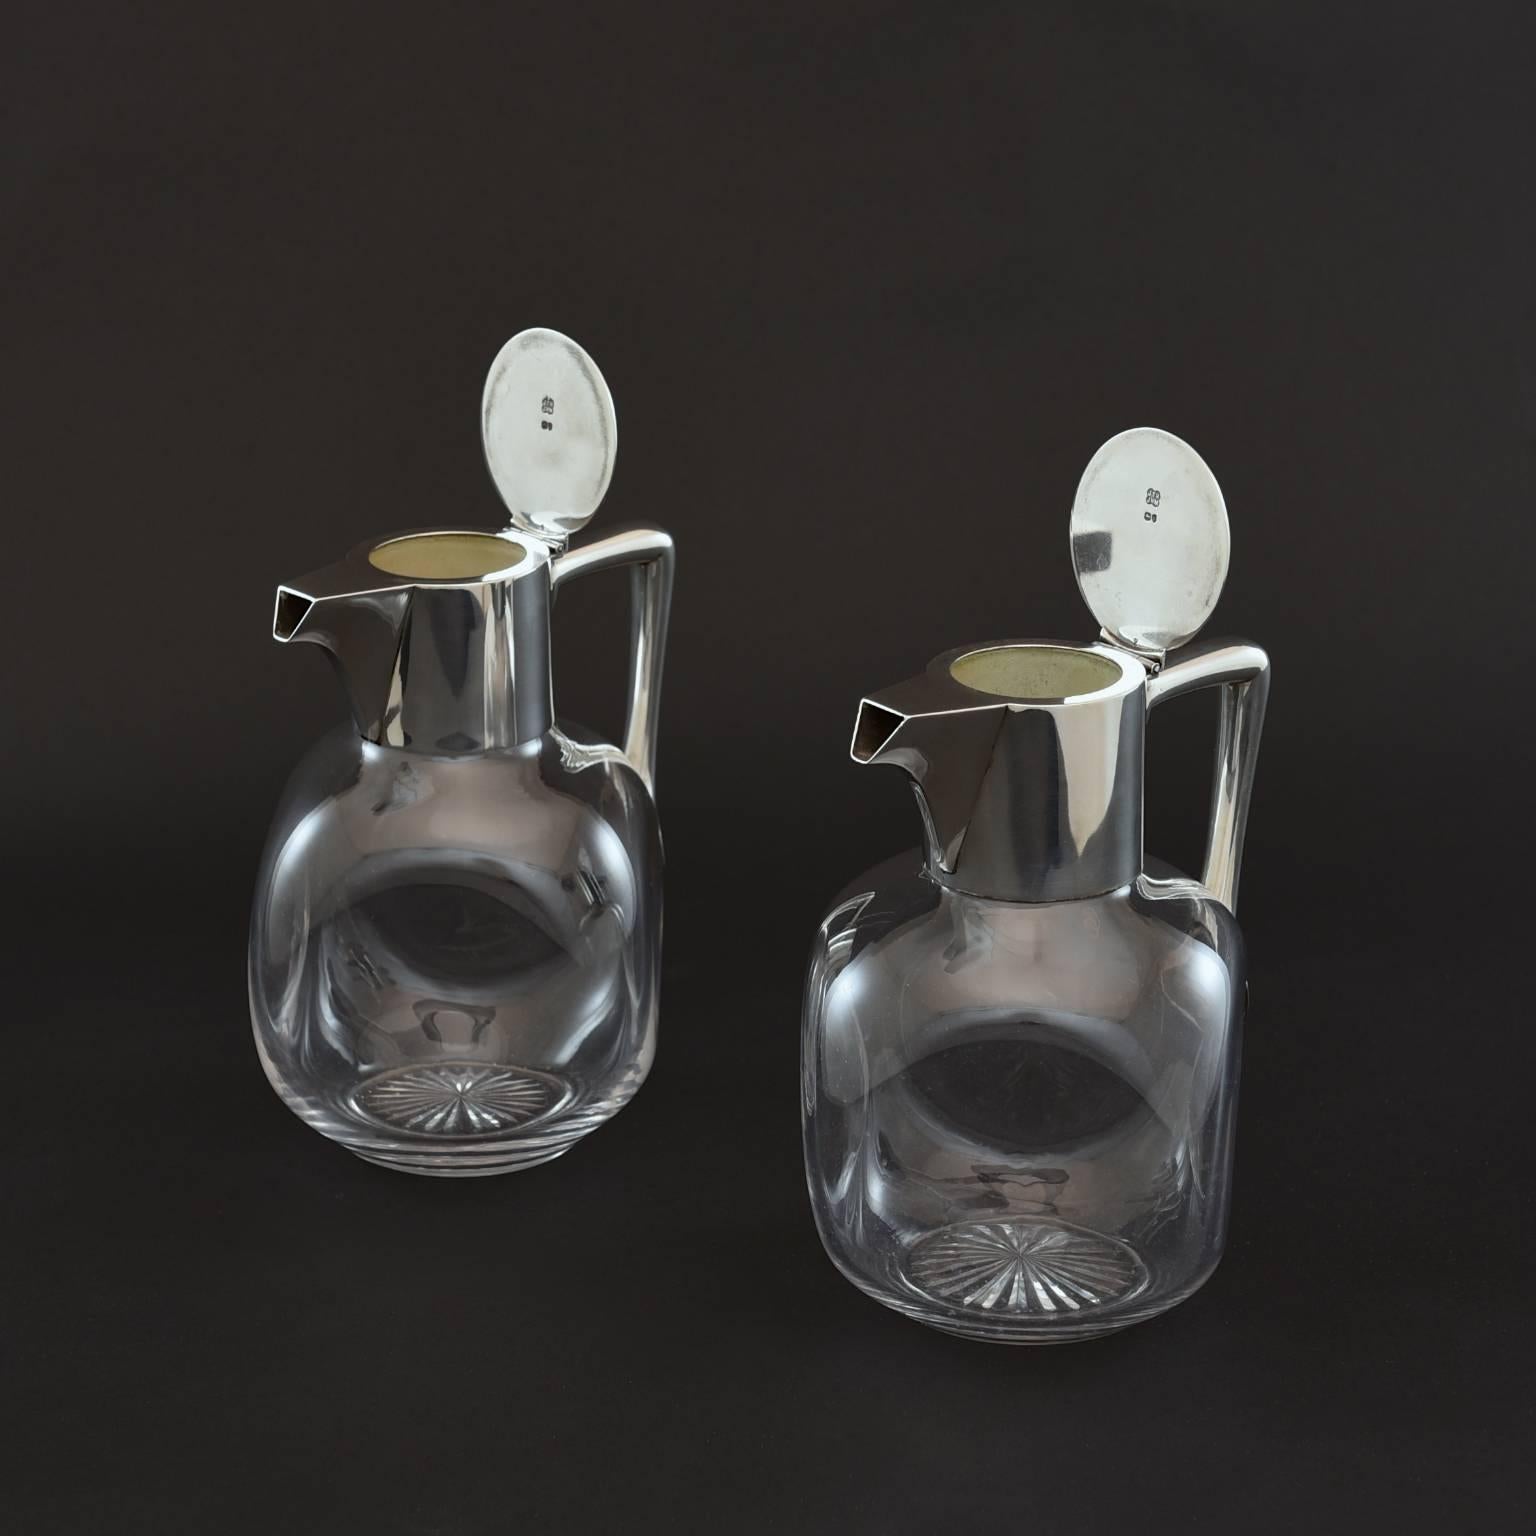 British Pair of Silver and Cut-Glass Claret Jugs